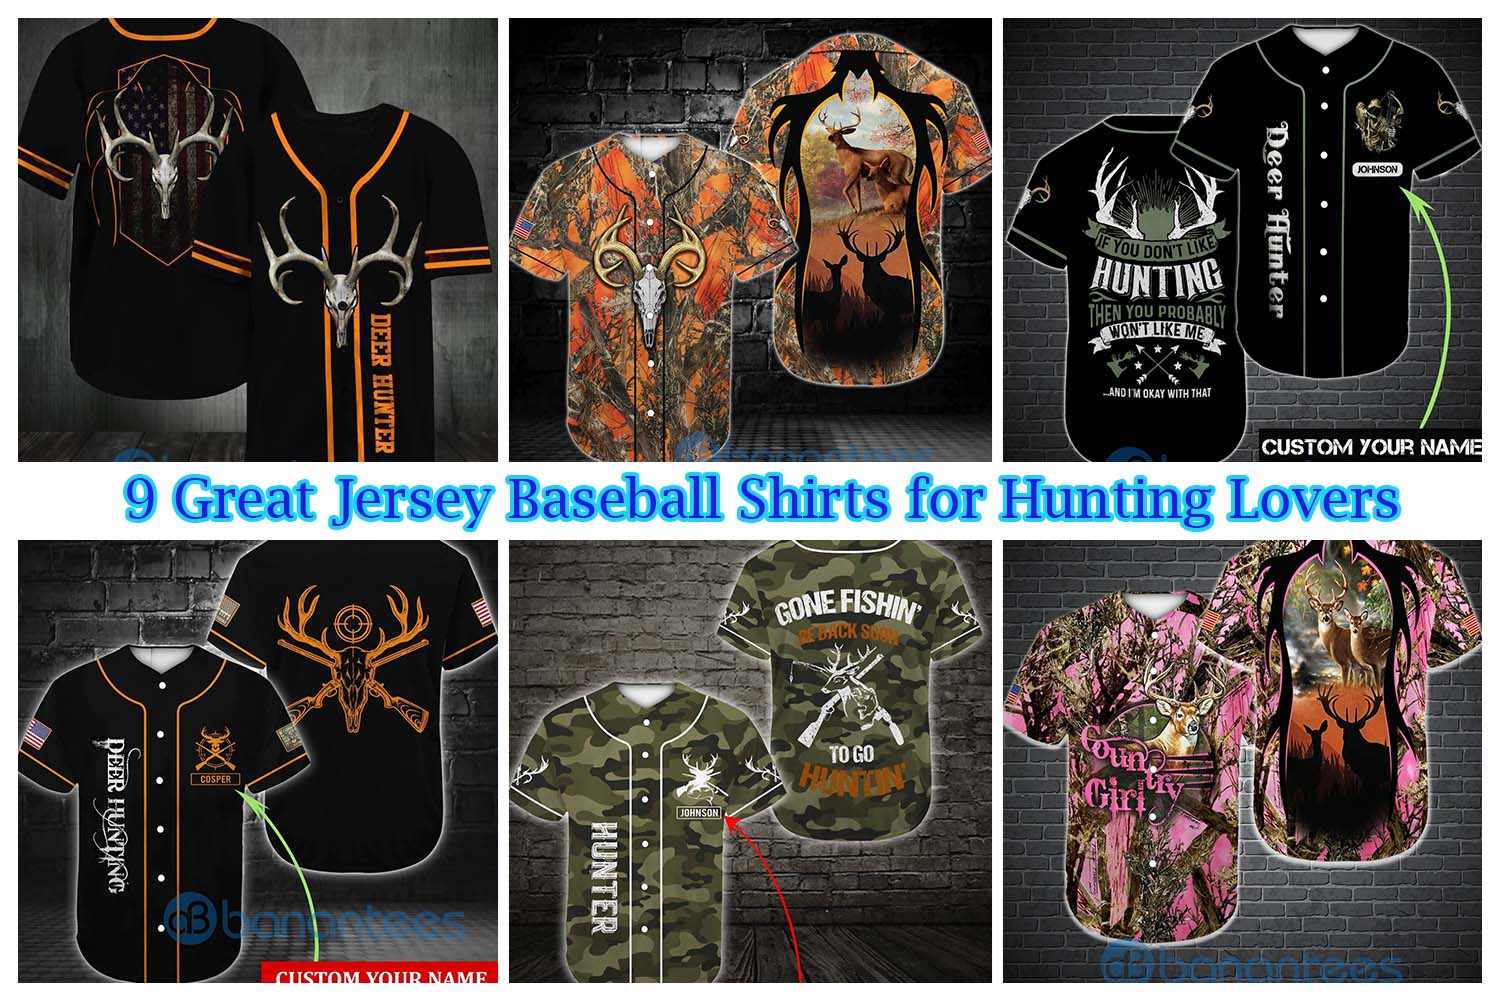 9 Great Jersey Baseball Shirts for Hunting Lovers